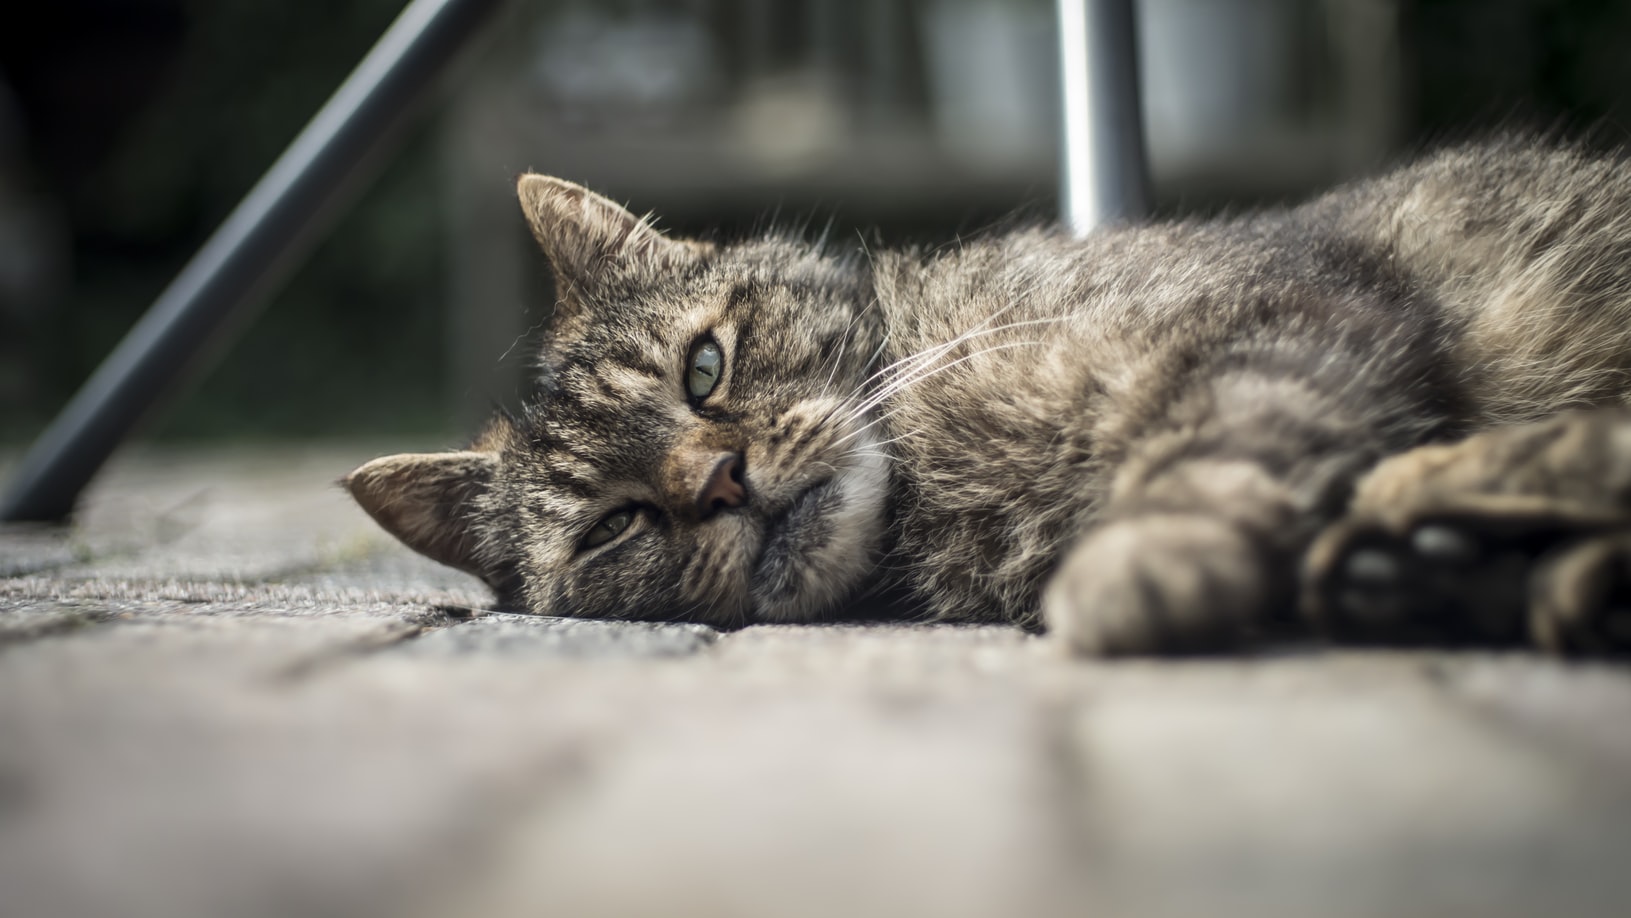 Common health issues for cats over the festive period